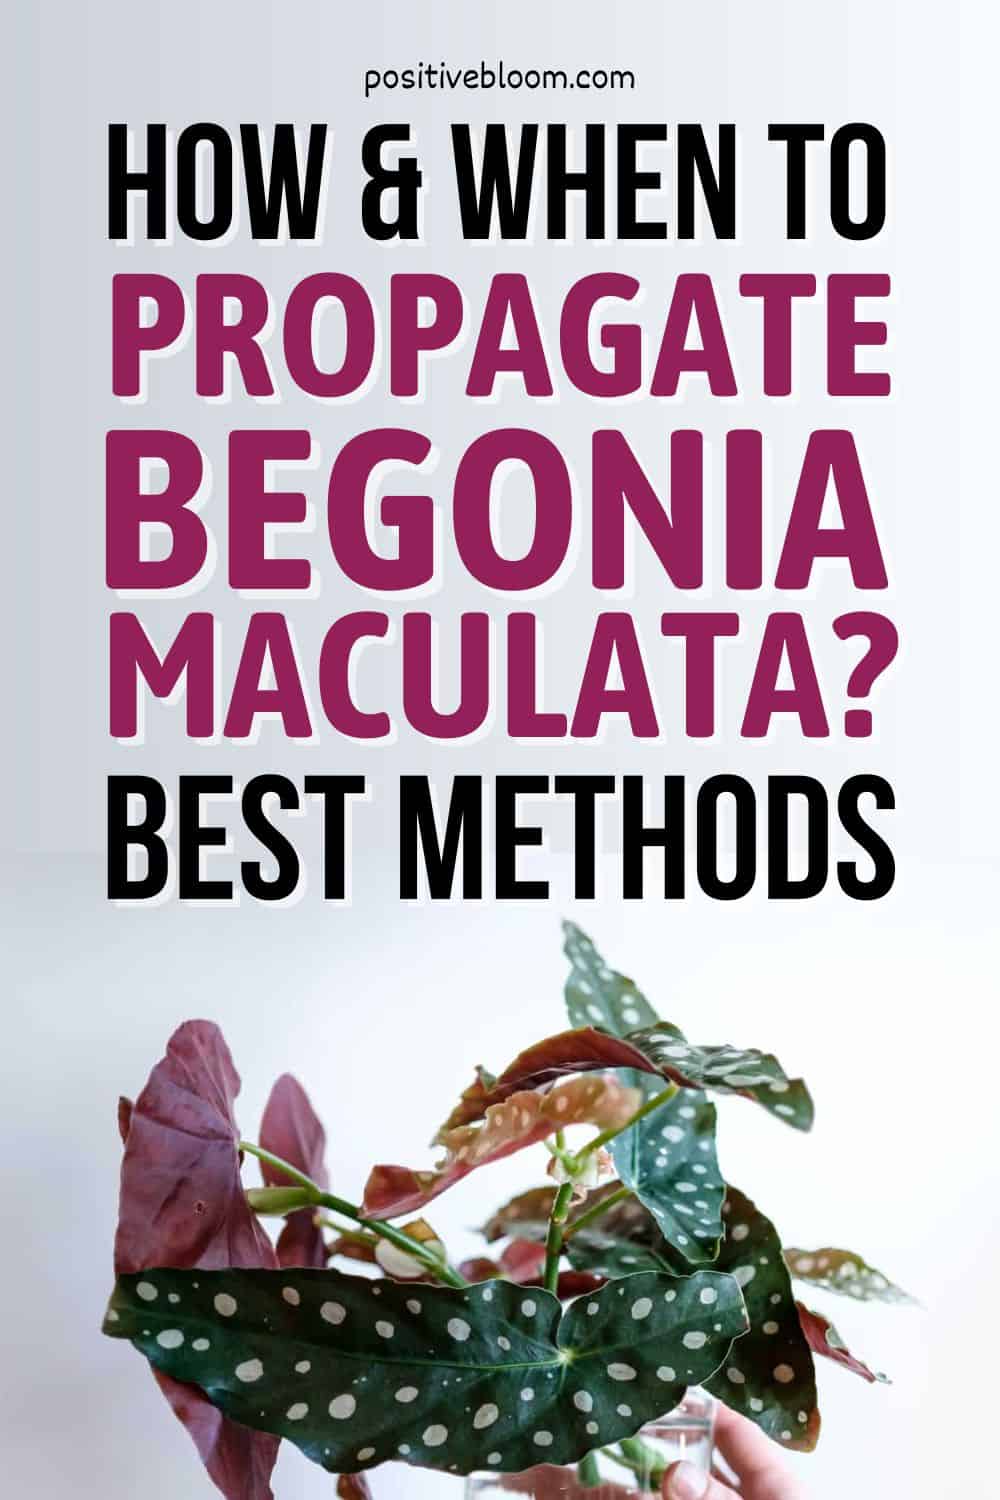 How And When To Propagate Begonia Maculata Best Methods Pinterest